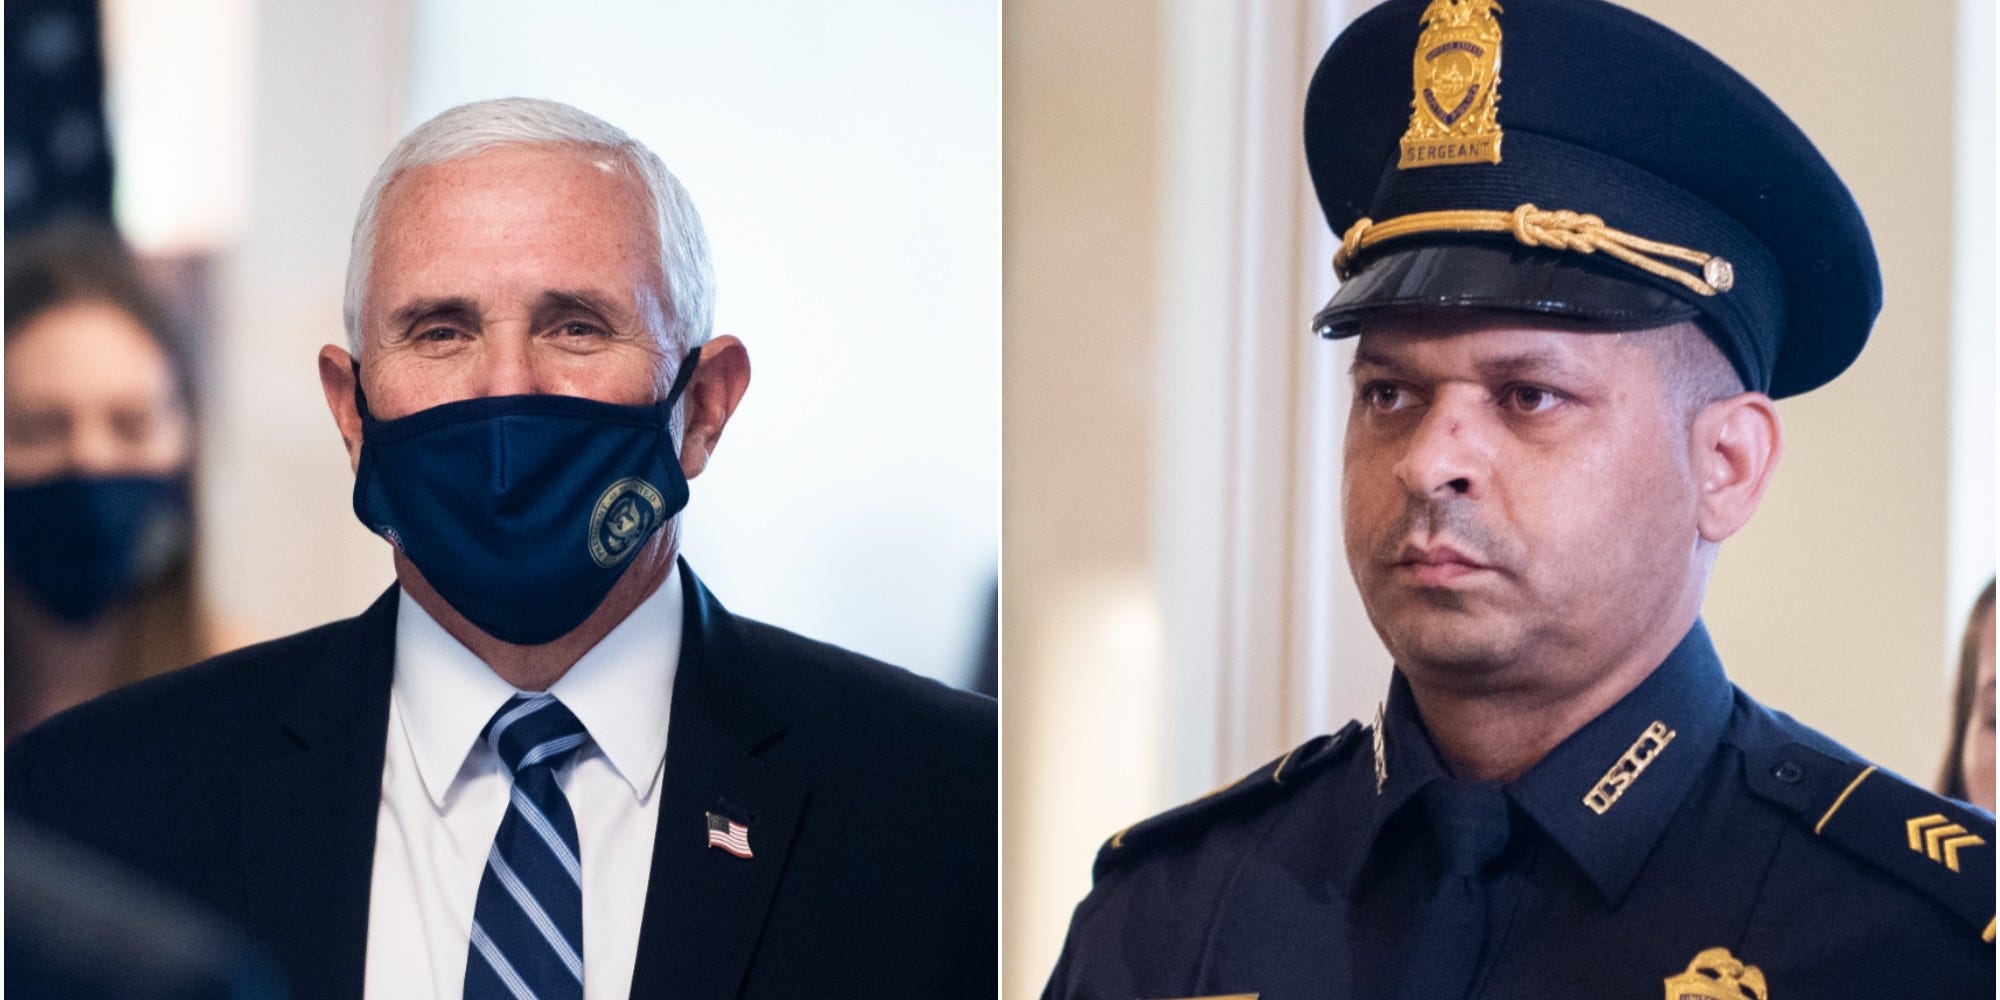 Former Vice President Mike Pence and Capitol Police Sergeant Aquilino Gonell.